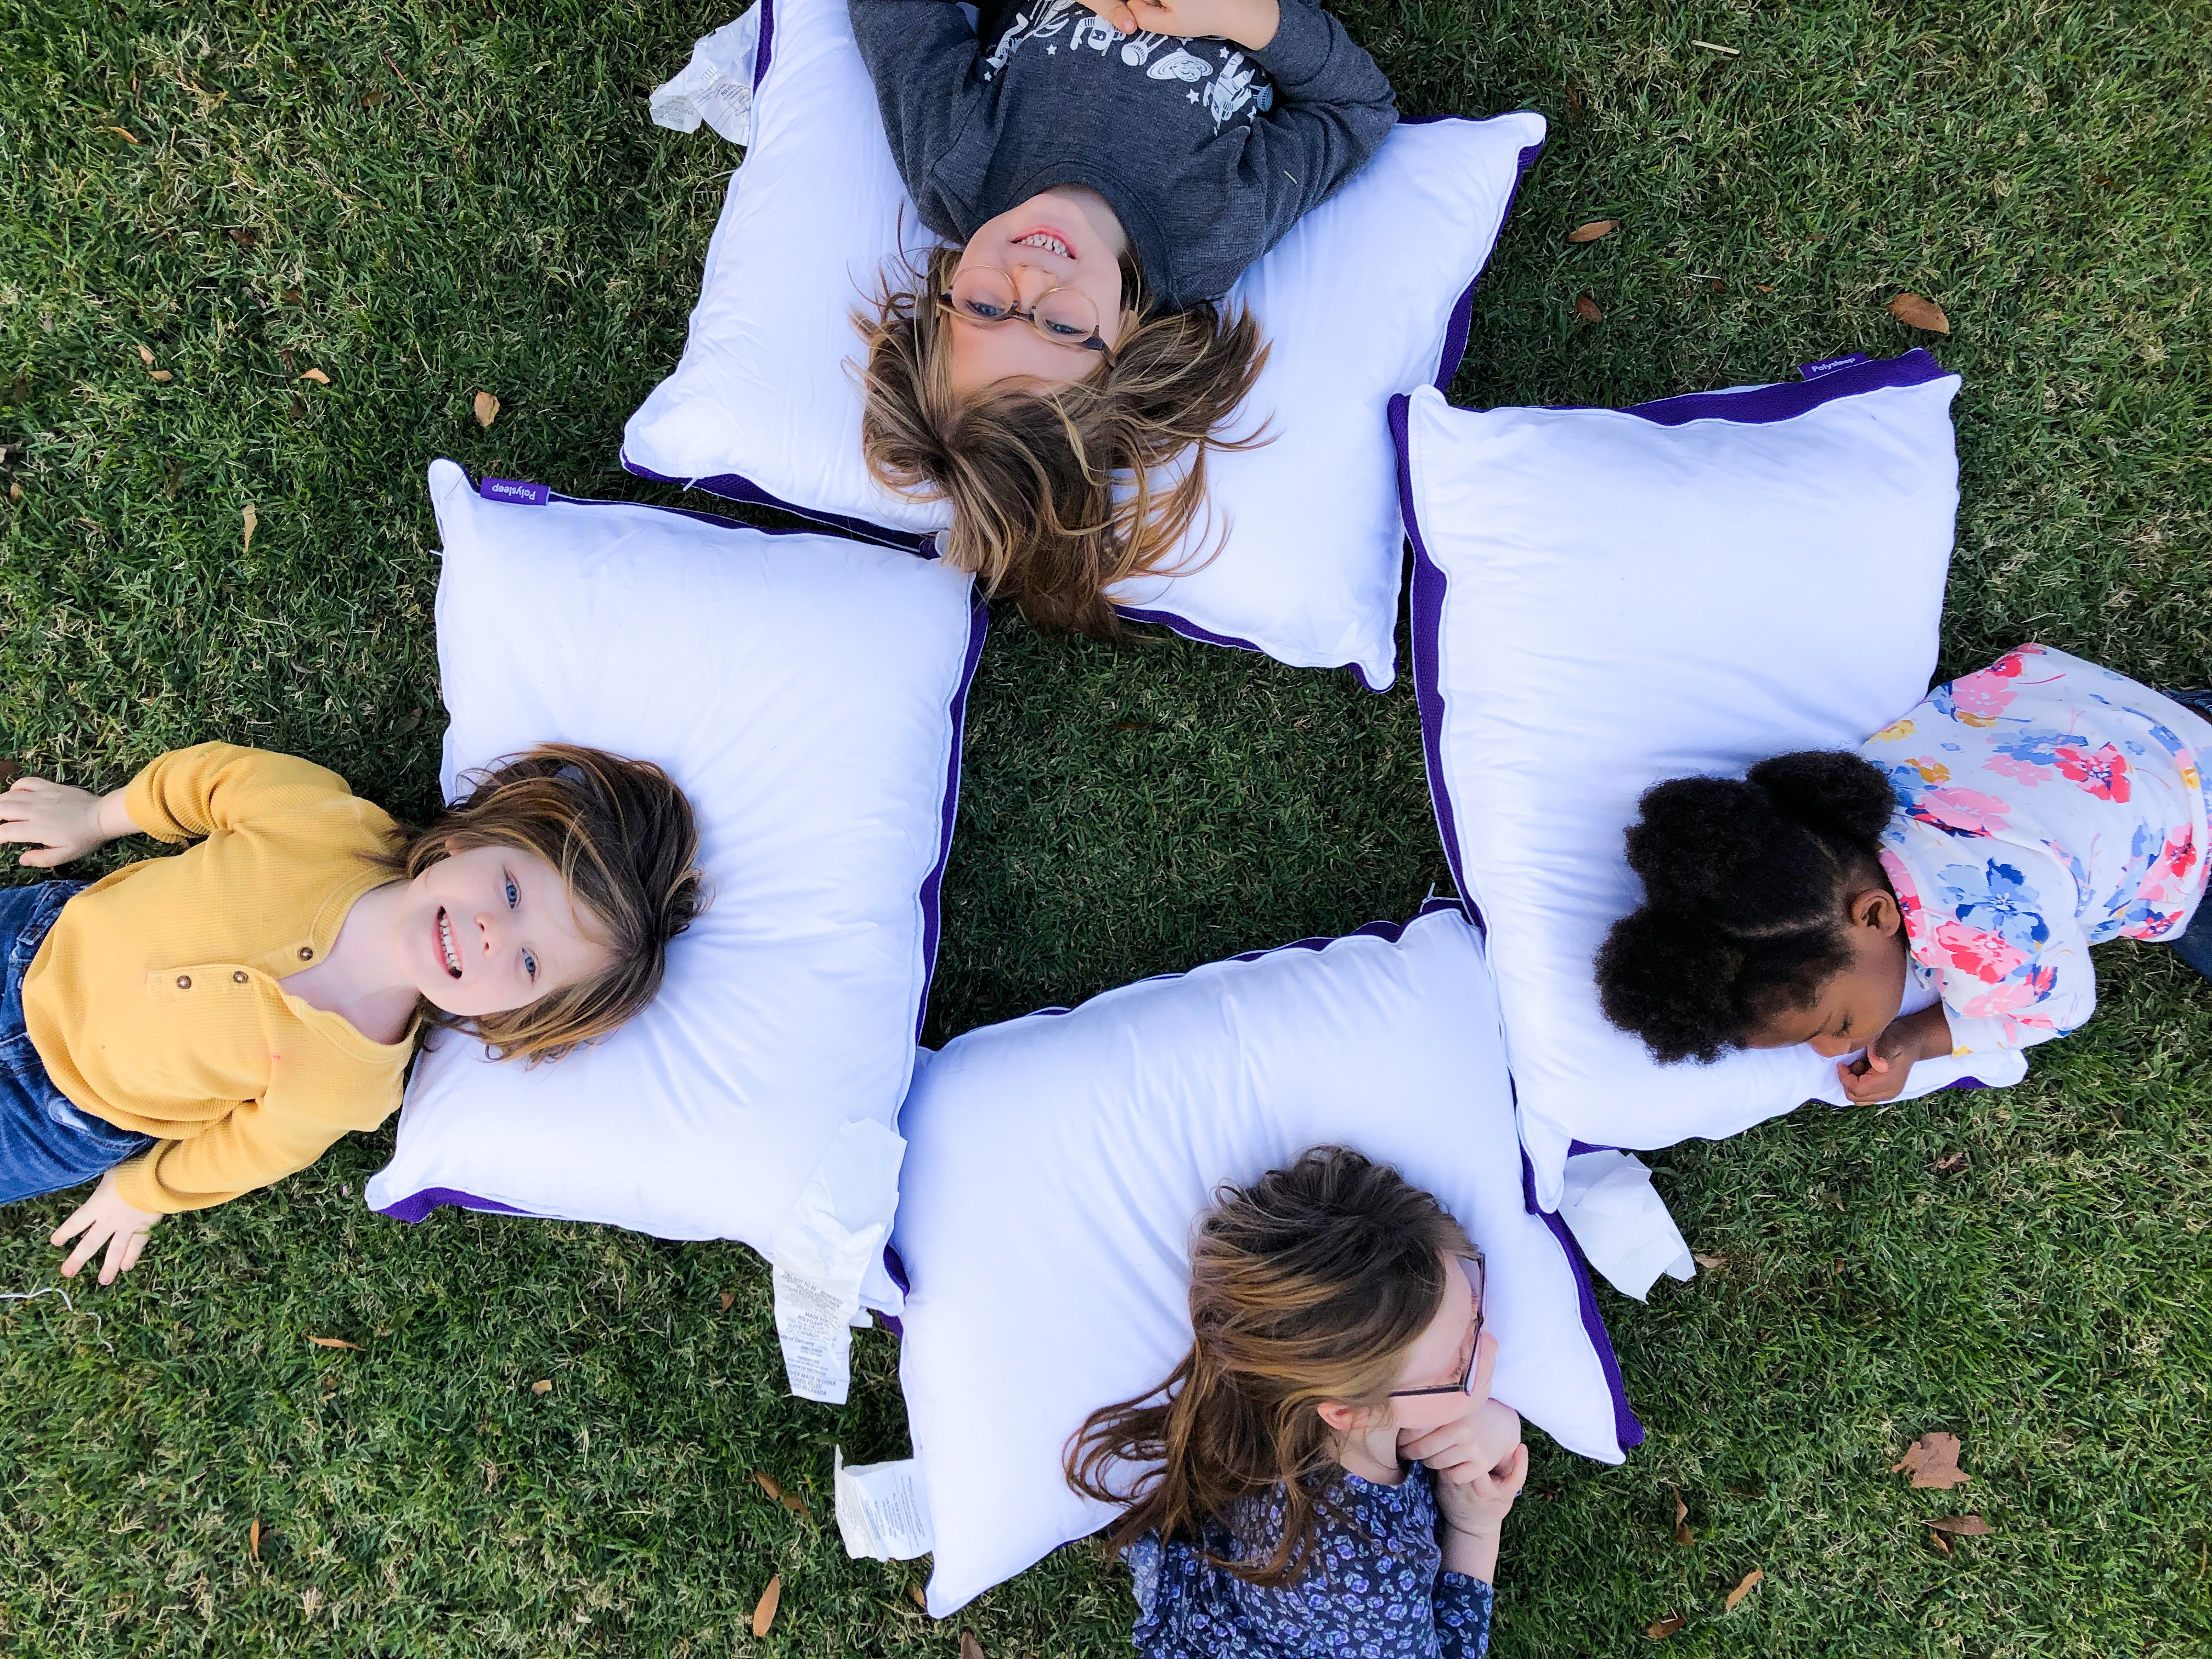 4 kids are lying on the grass with their Polysleep pillows forming a circle